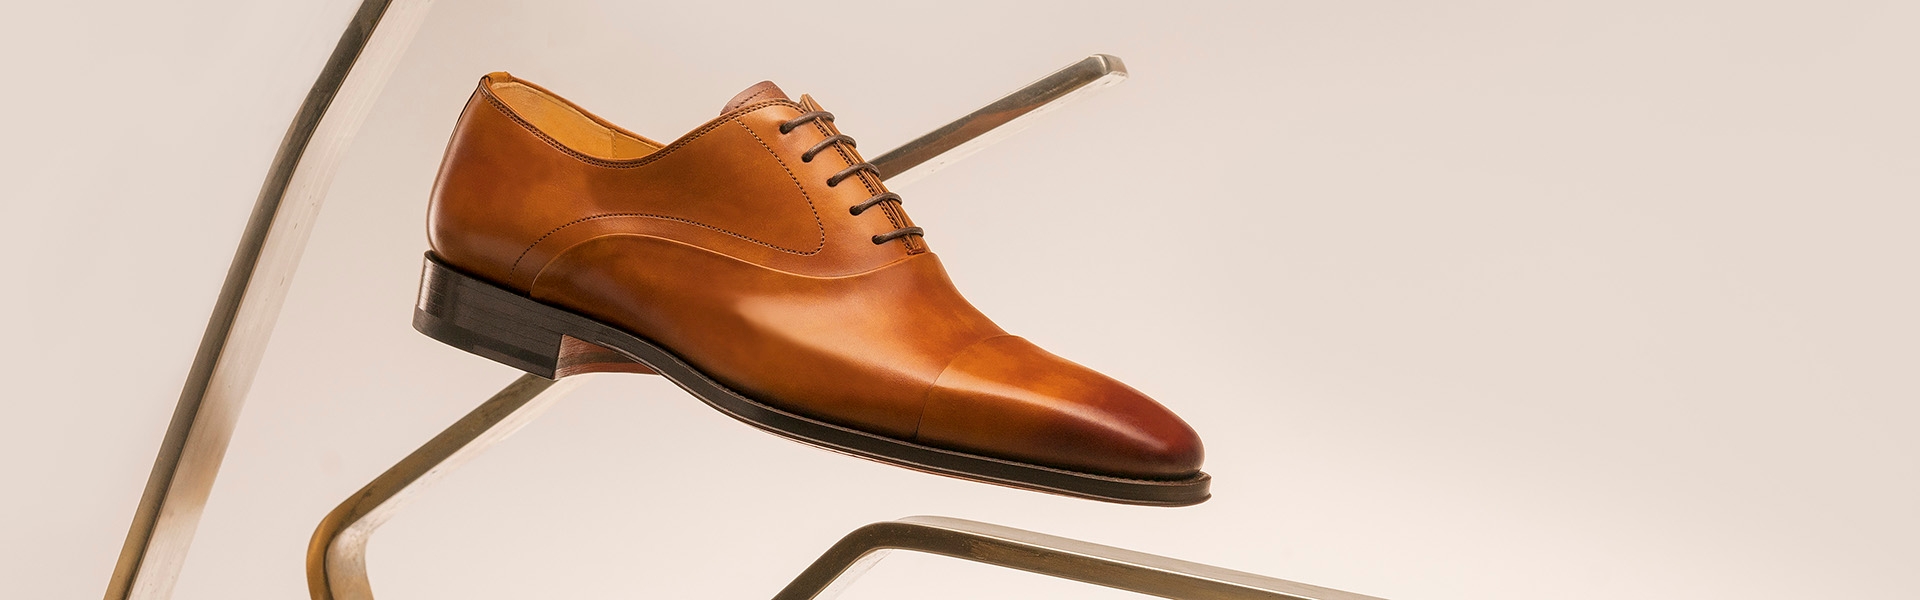 The Magnanni Saffron lace up sits on an angular, golden display.